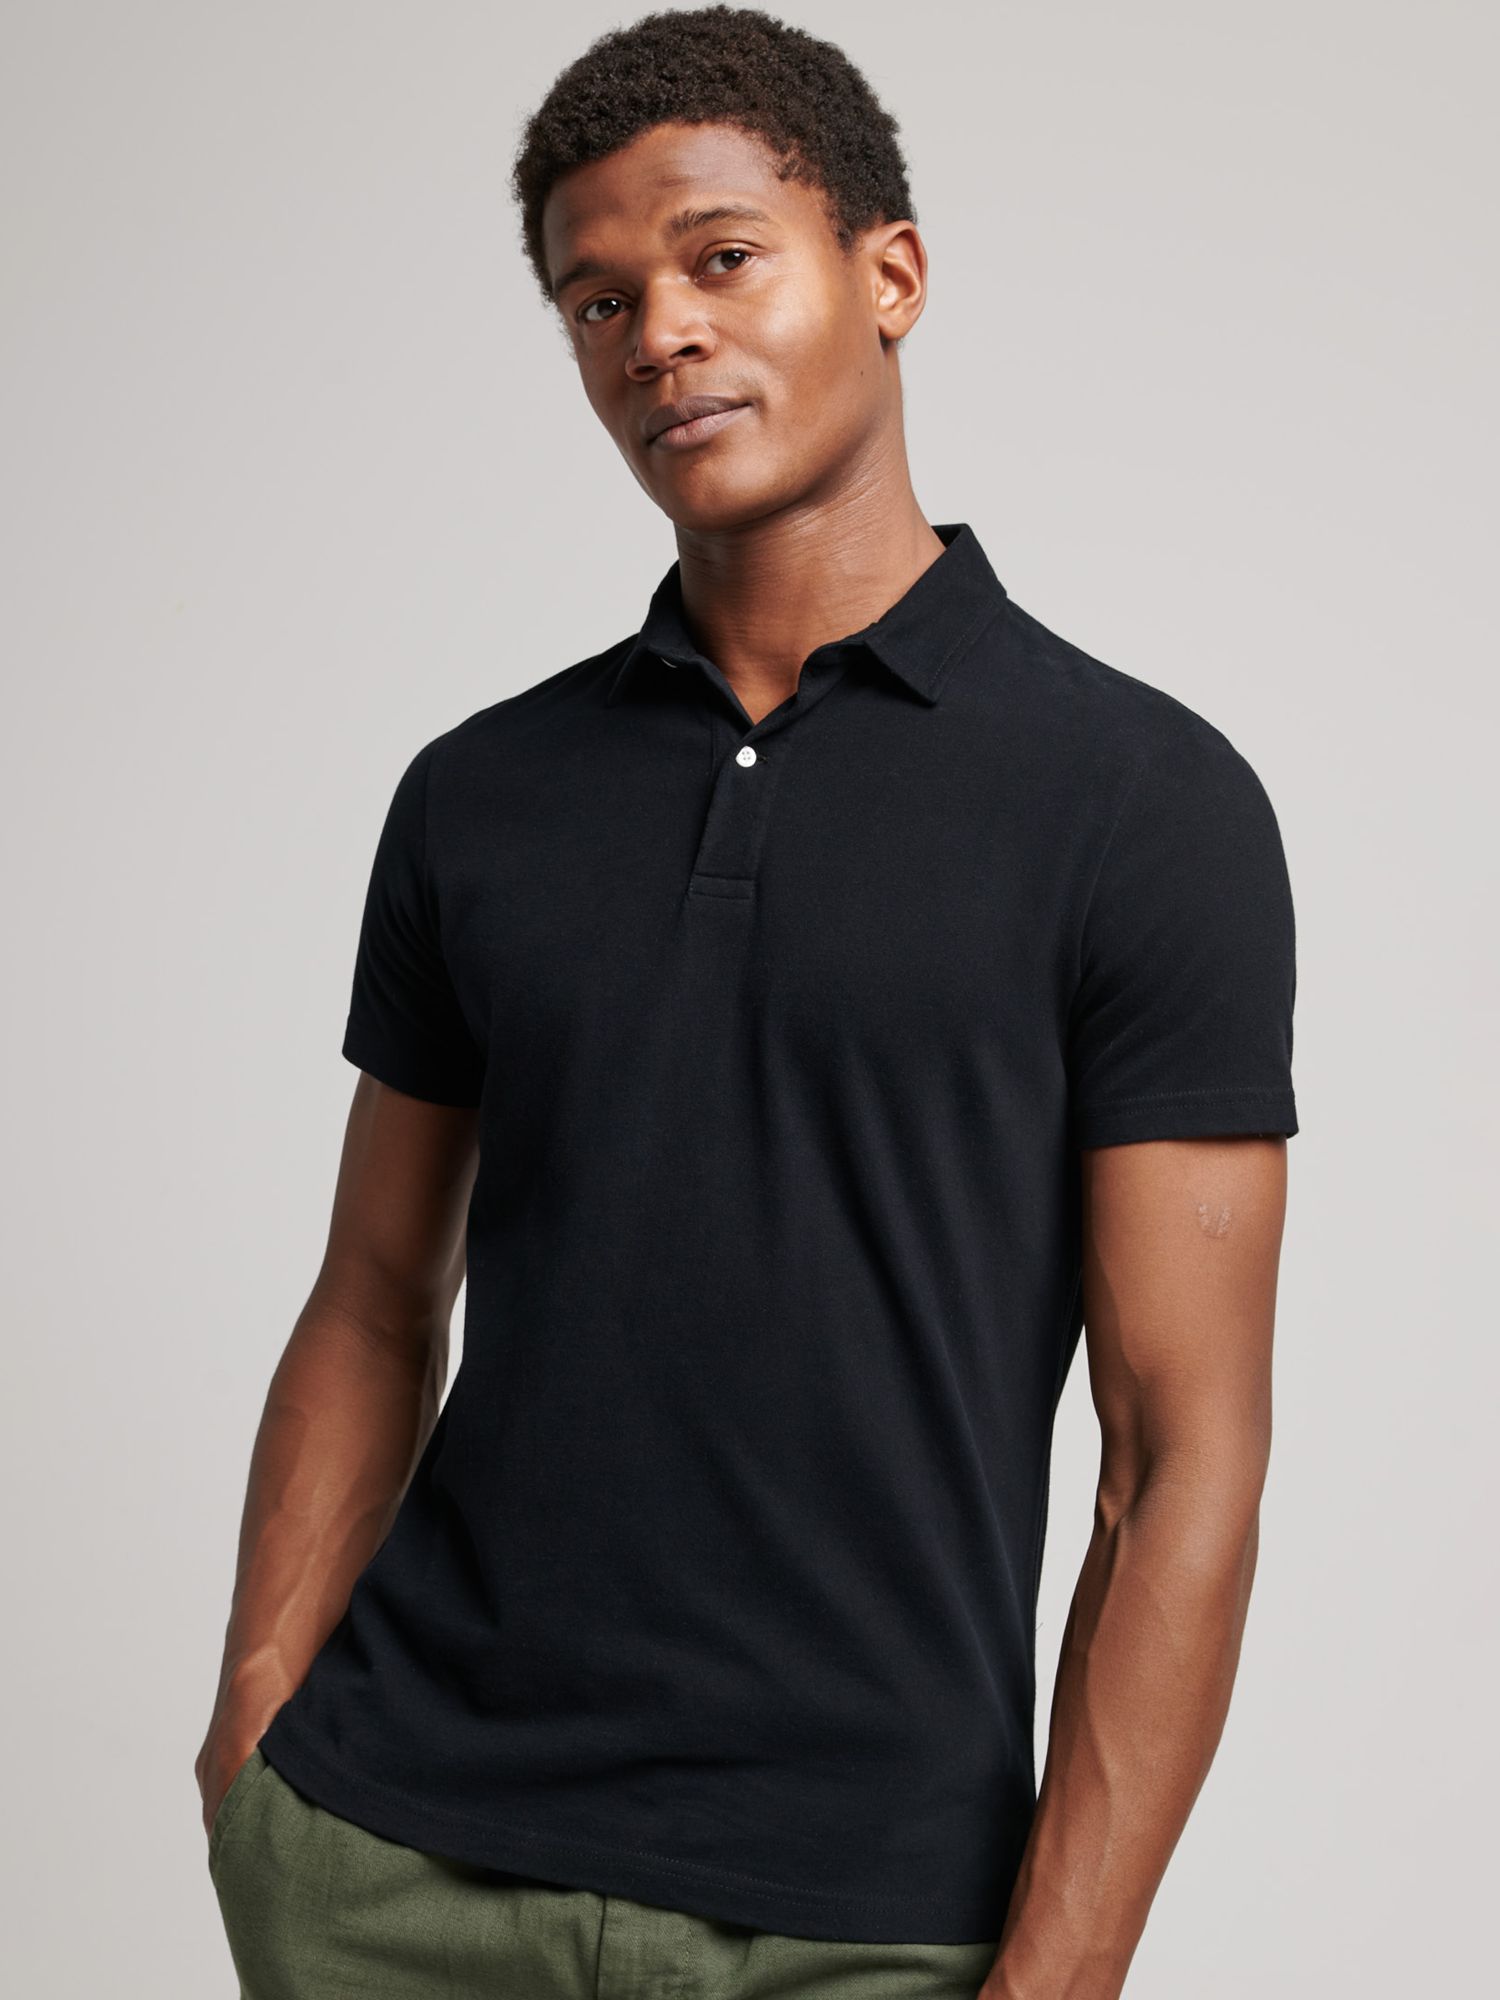 Superdry Jersey Polo Shirt, Black, S